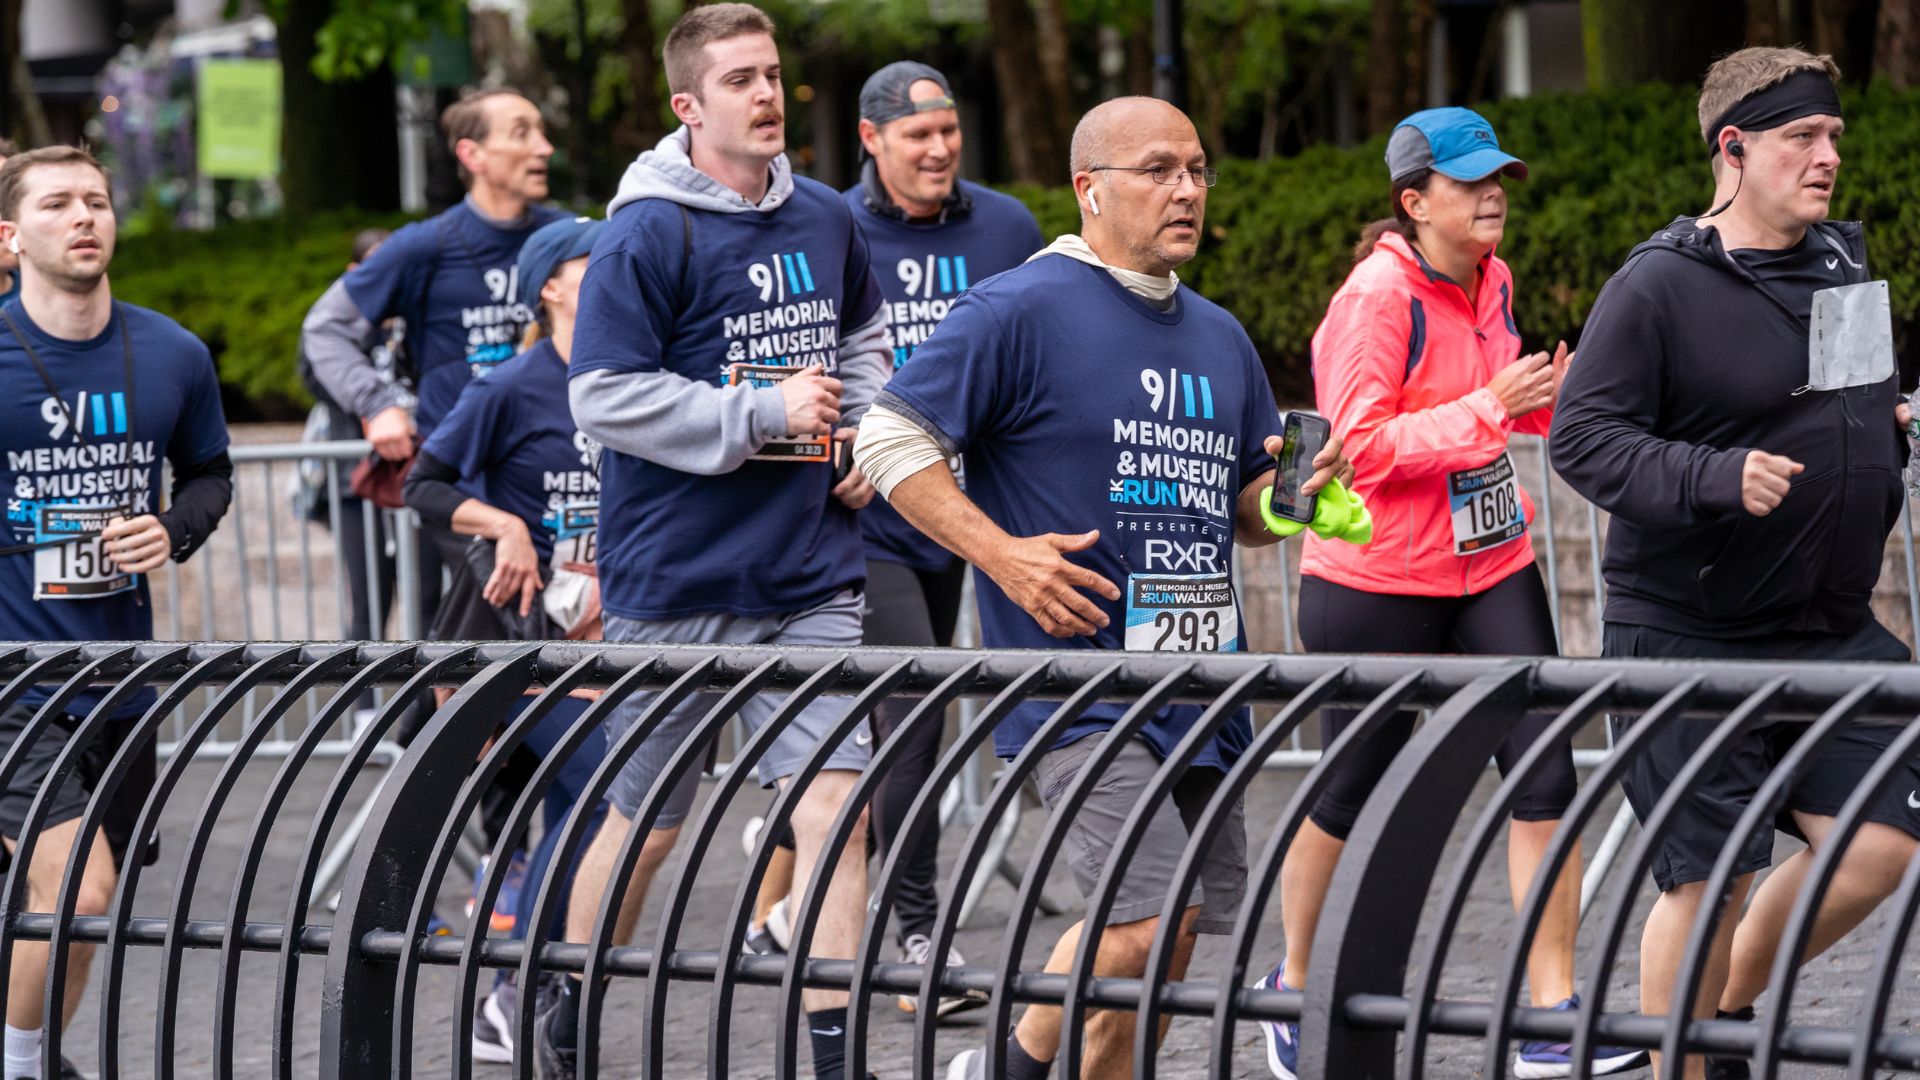 A group of runners behind a metal fence during the 5K